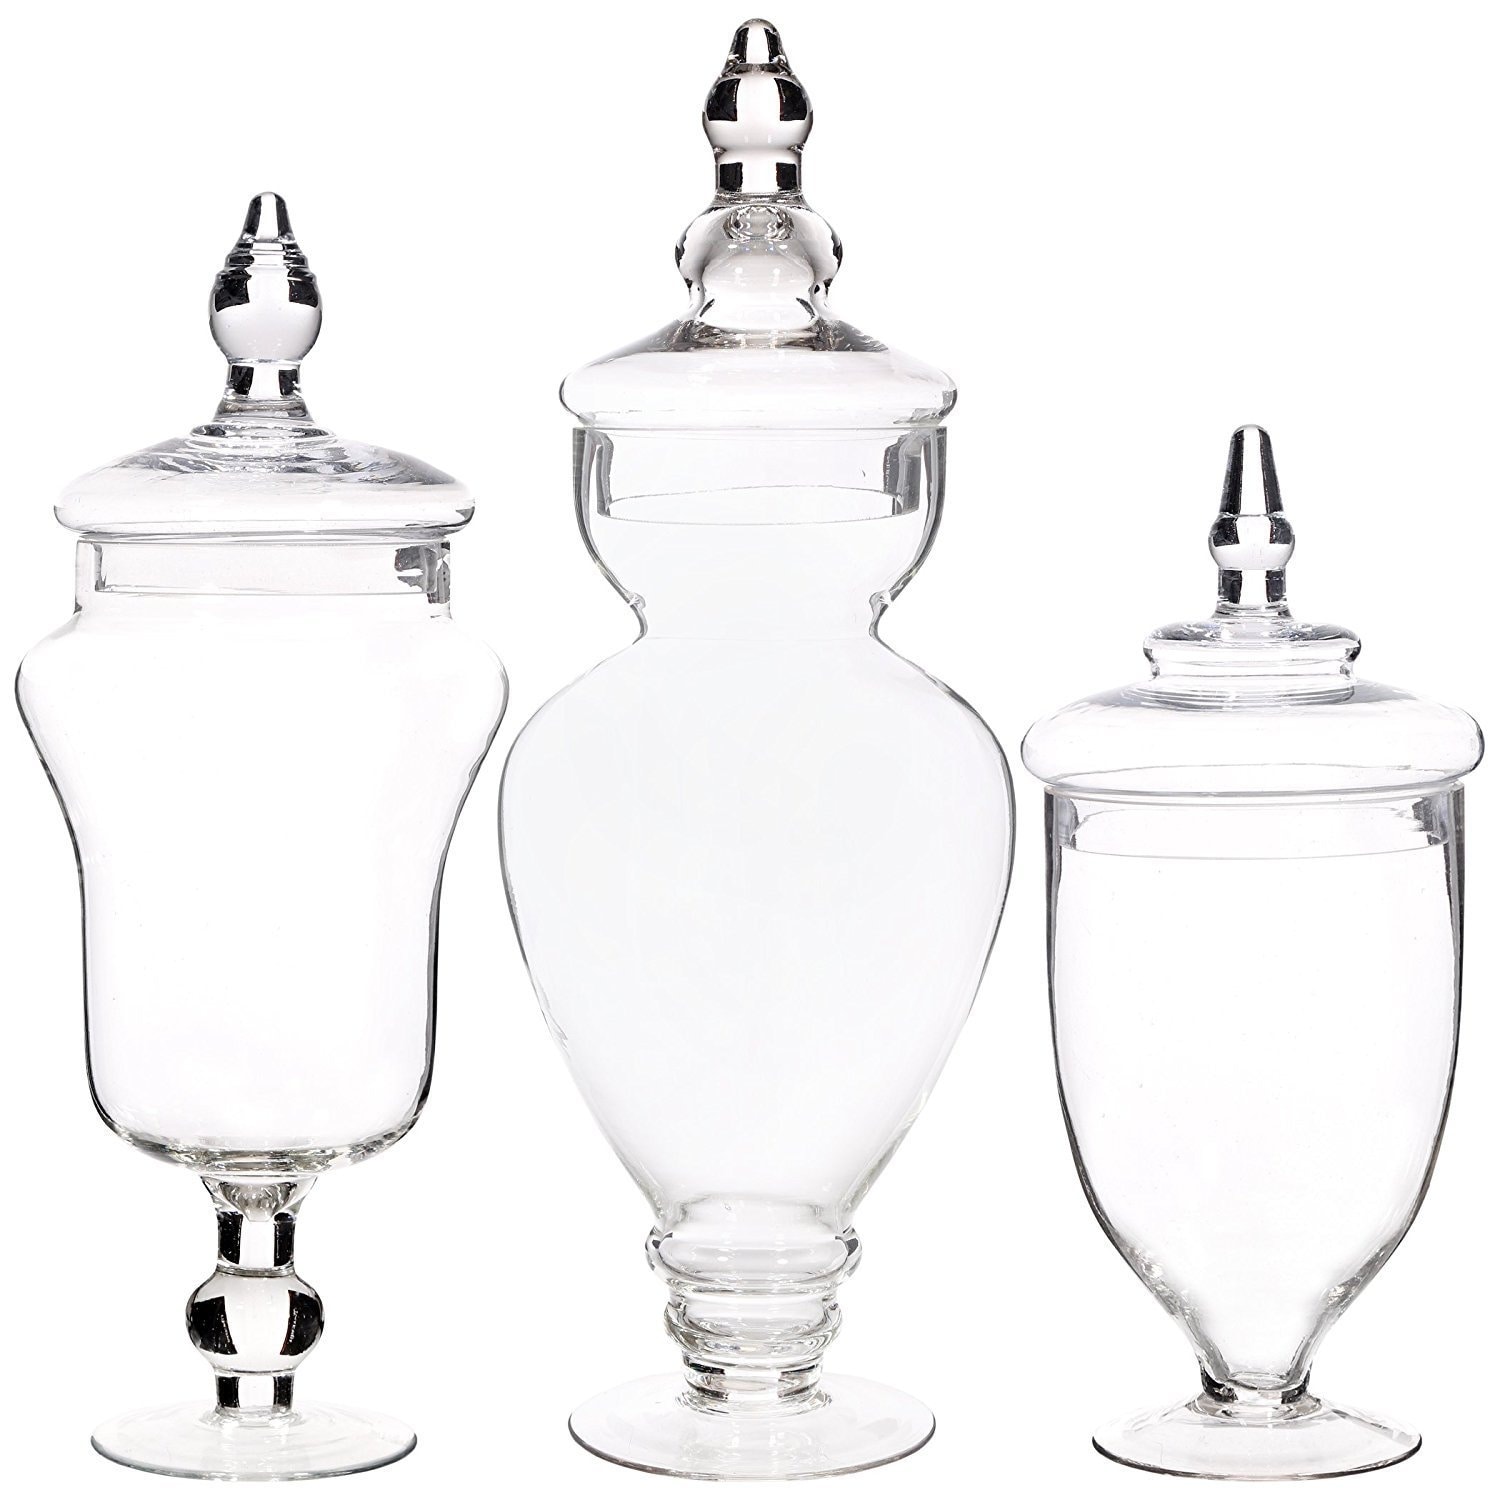 https://ak1.ostkcdn.com/images/products/is/images/direct/71043acc1cec1aea51fb774796bcc9a9c35814ba/Palais-Glassware-Clear-Glass-Apothecary-Jars%2C-Wedding-Candy-Buffet-Containers%2C-Large%2C-Clear%2C-Set-of-3.jpg